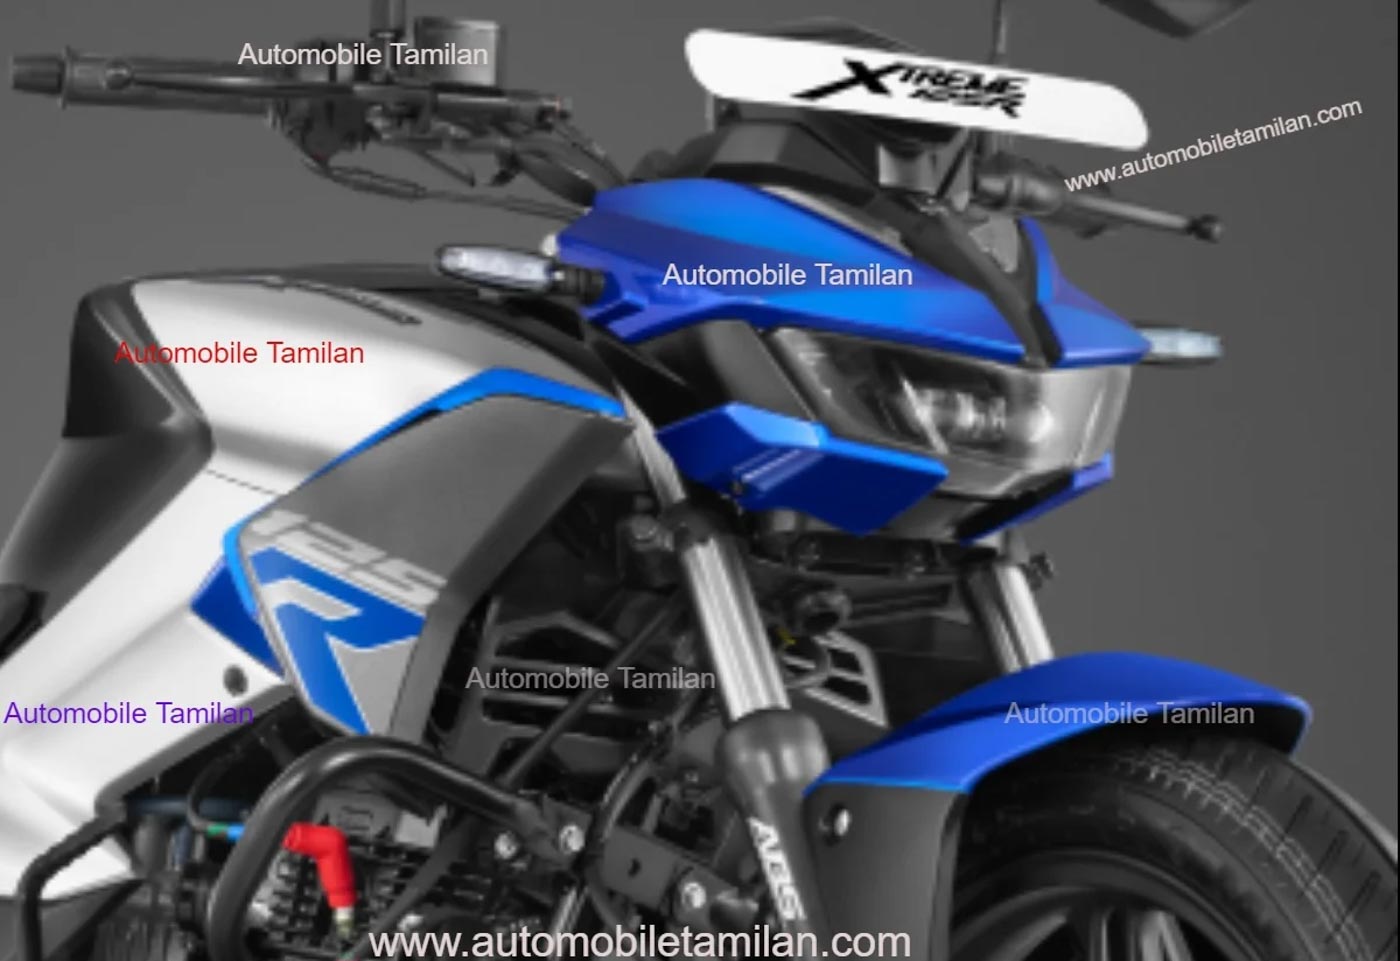 Hero Xtreme 125R (Raider Rival) Leaked Ahead Of Launch